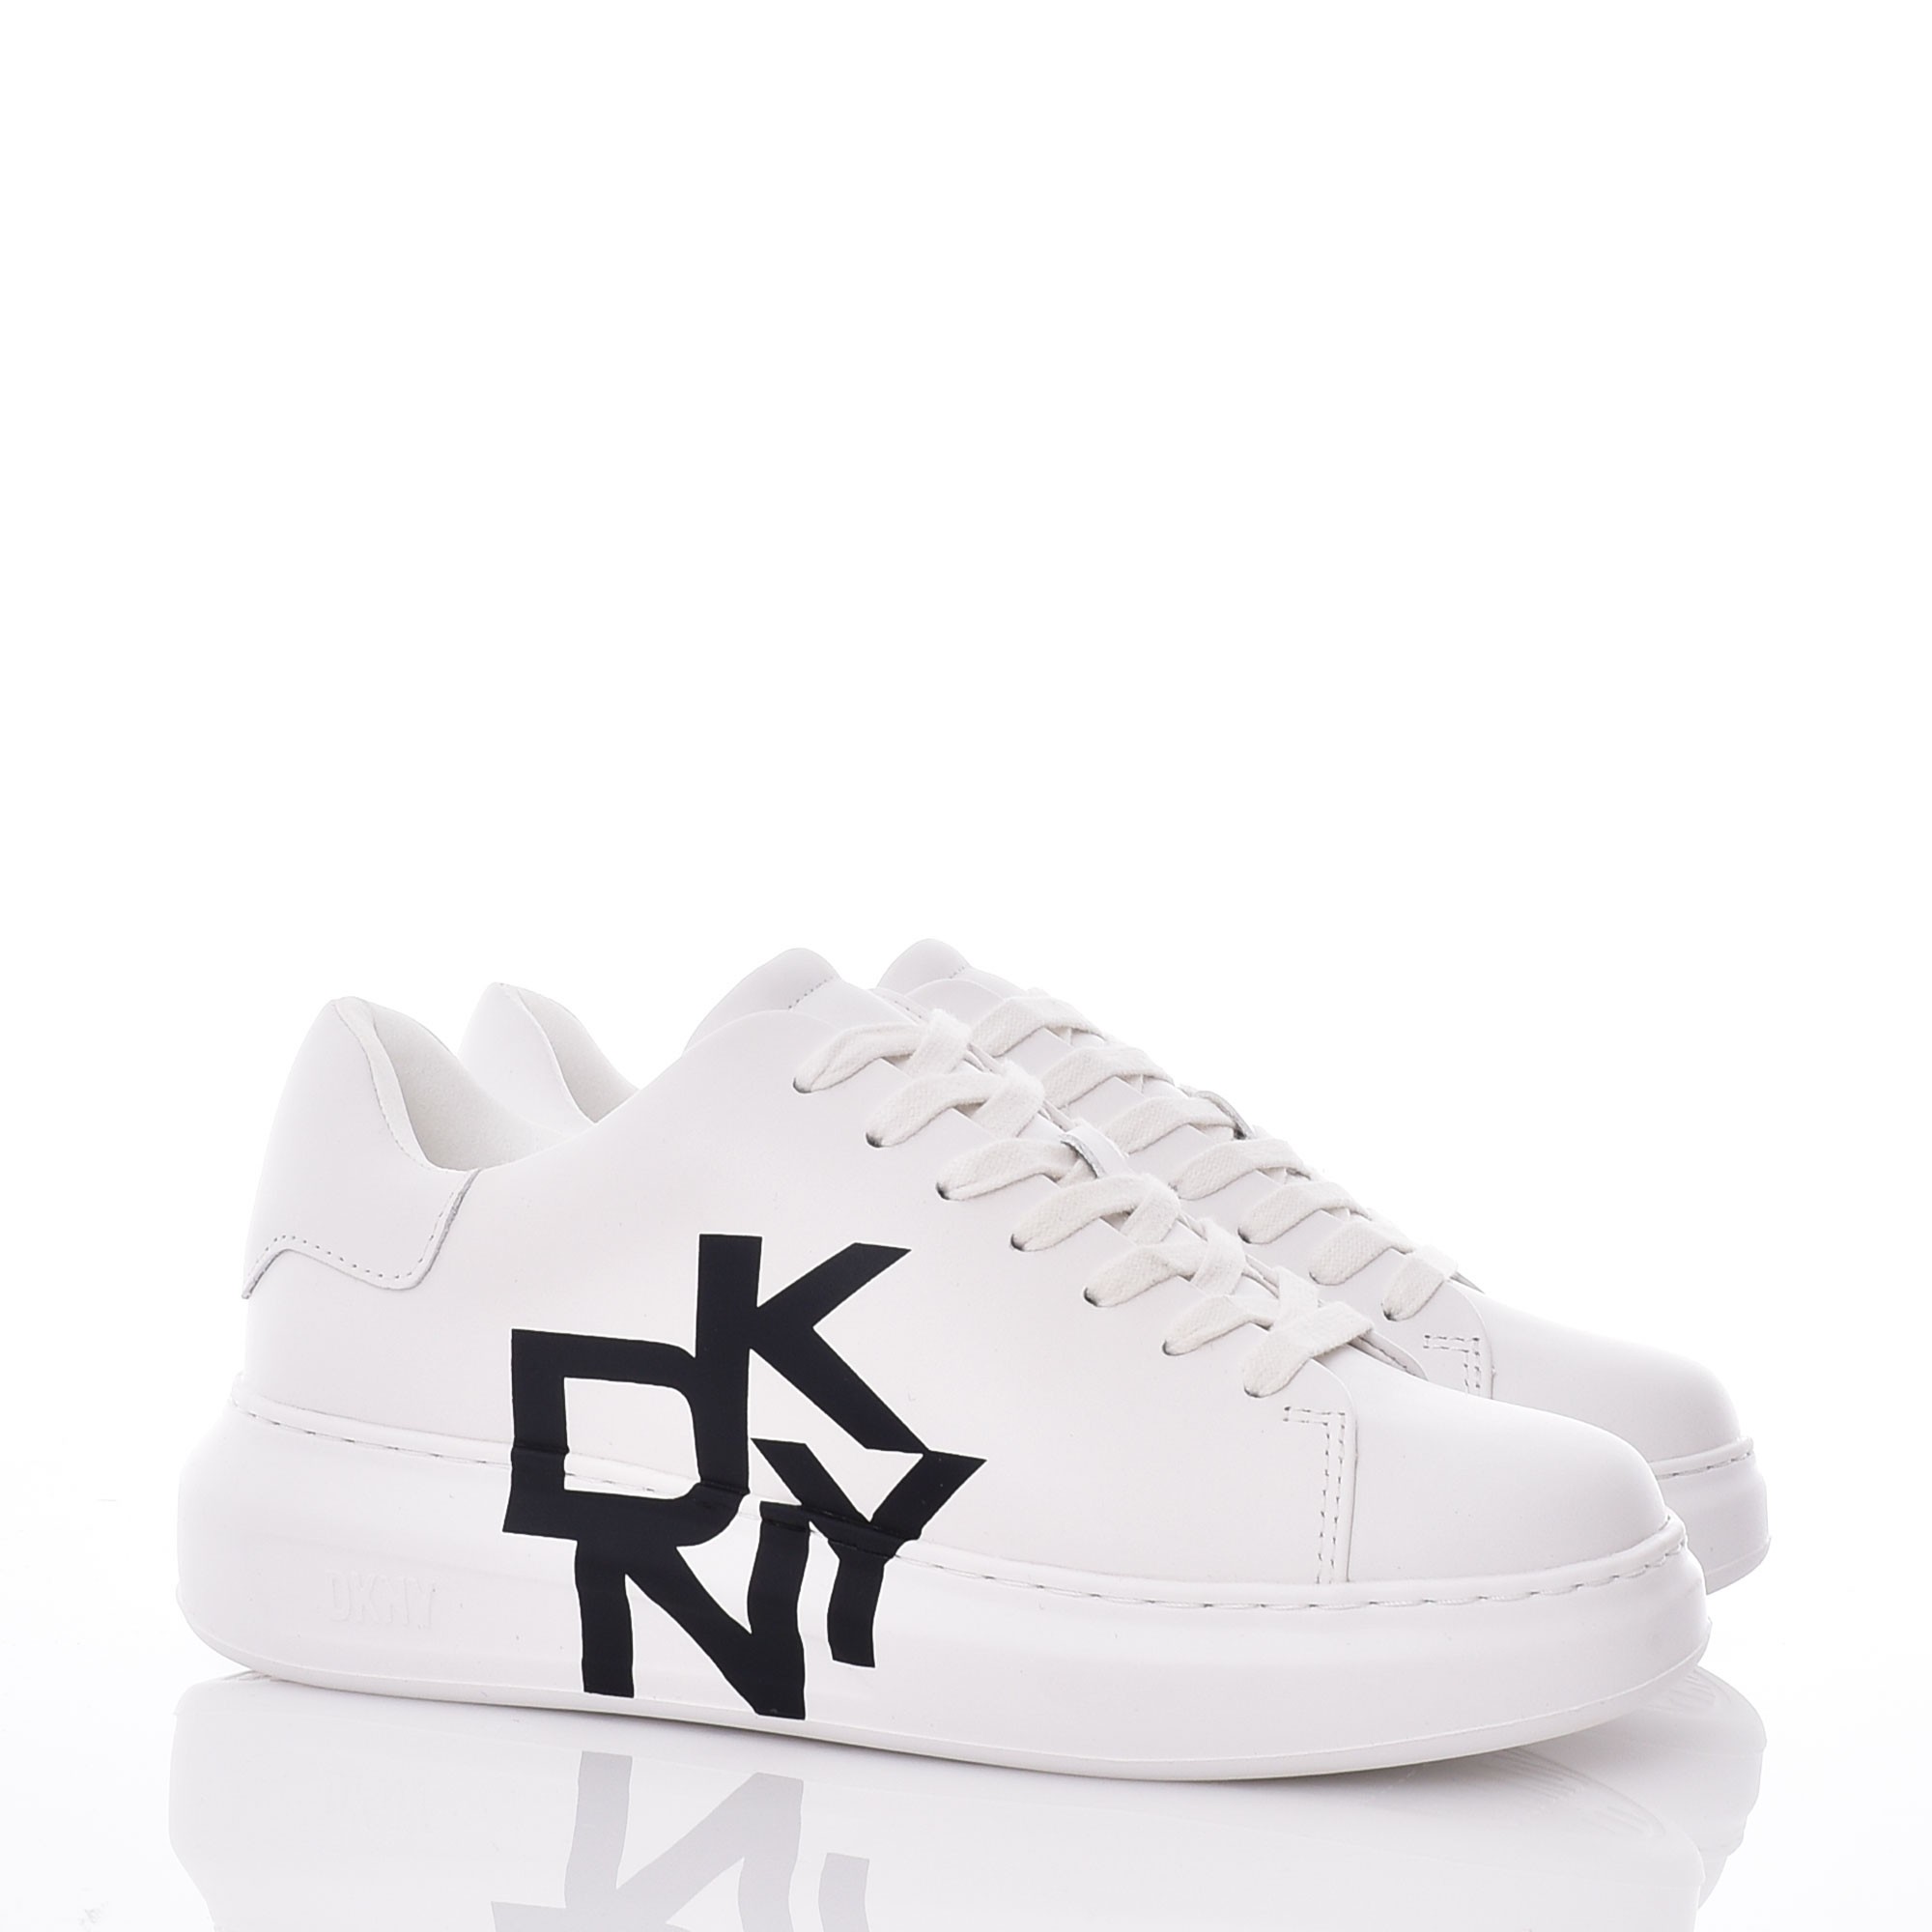 KEIRA LACE UP SNEAKER